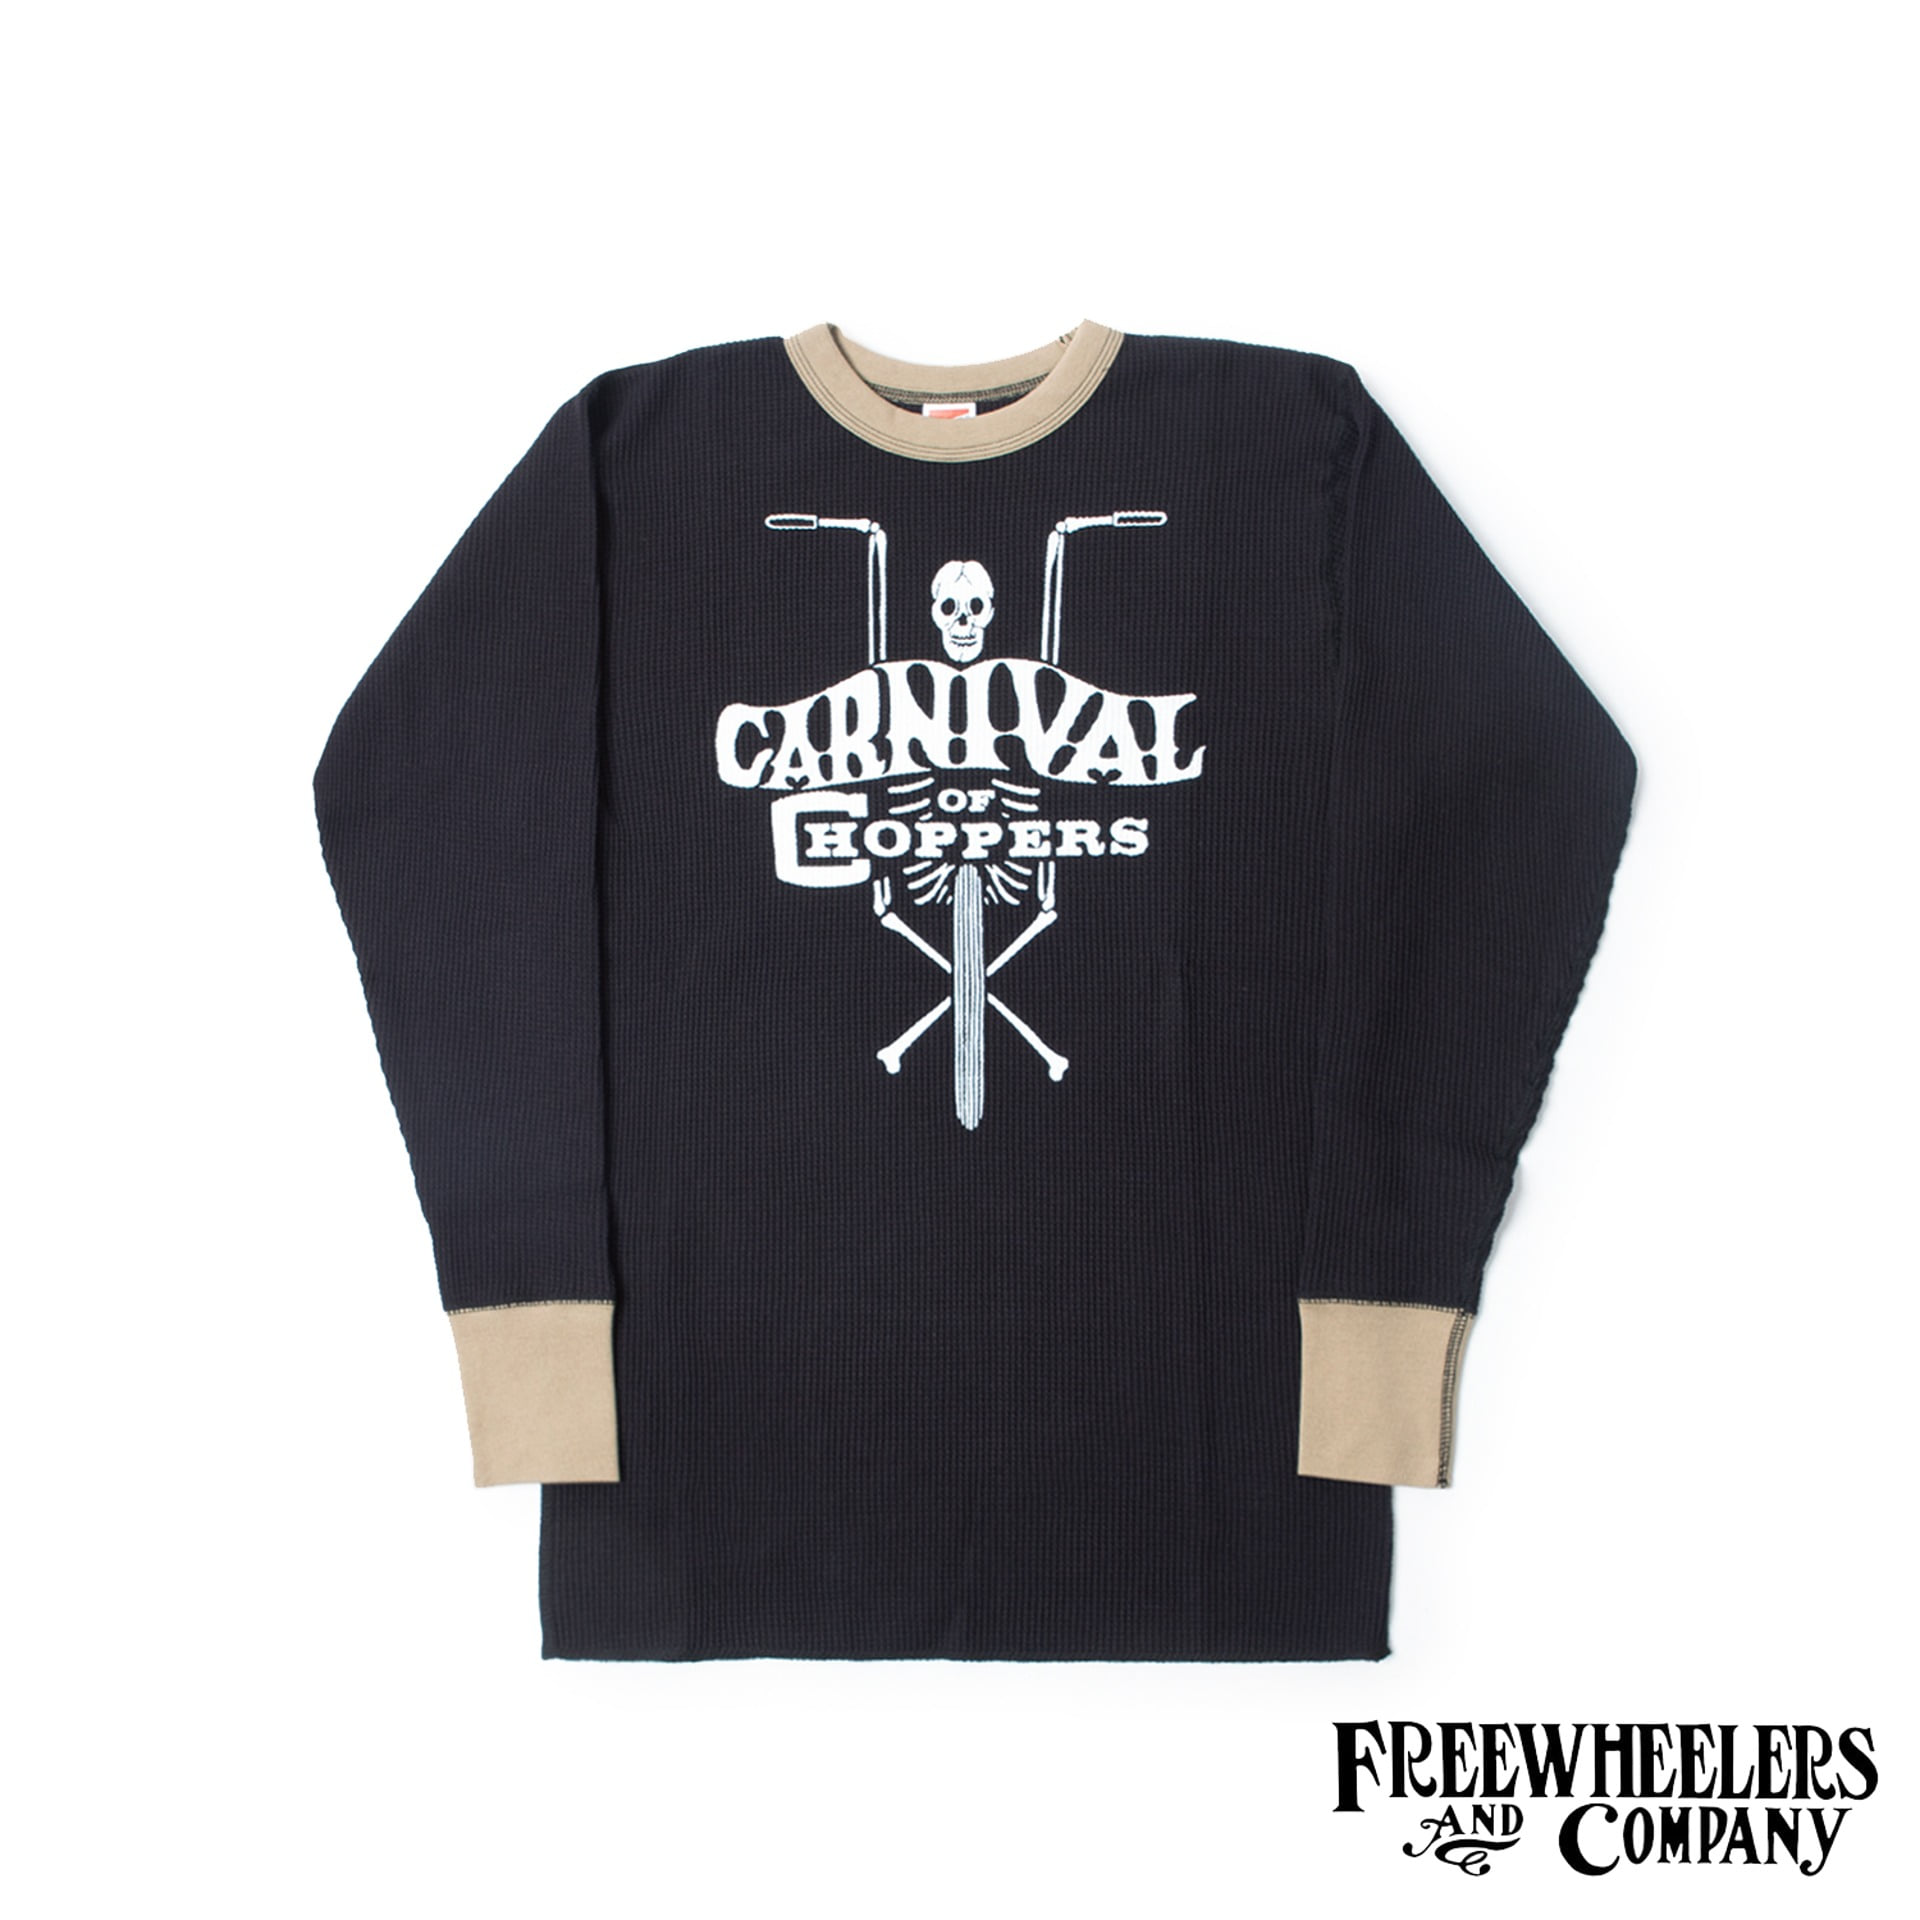 [POWER WEAR]1950s STYLE UNDERWEAR“CARNIVAL OF CHOPPERS”CREW NECKED THERMAL LONG SLEEVE SHIRT(Black x Oil Stain)